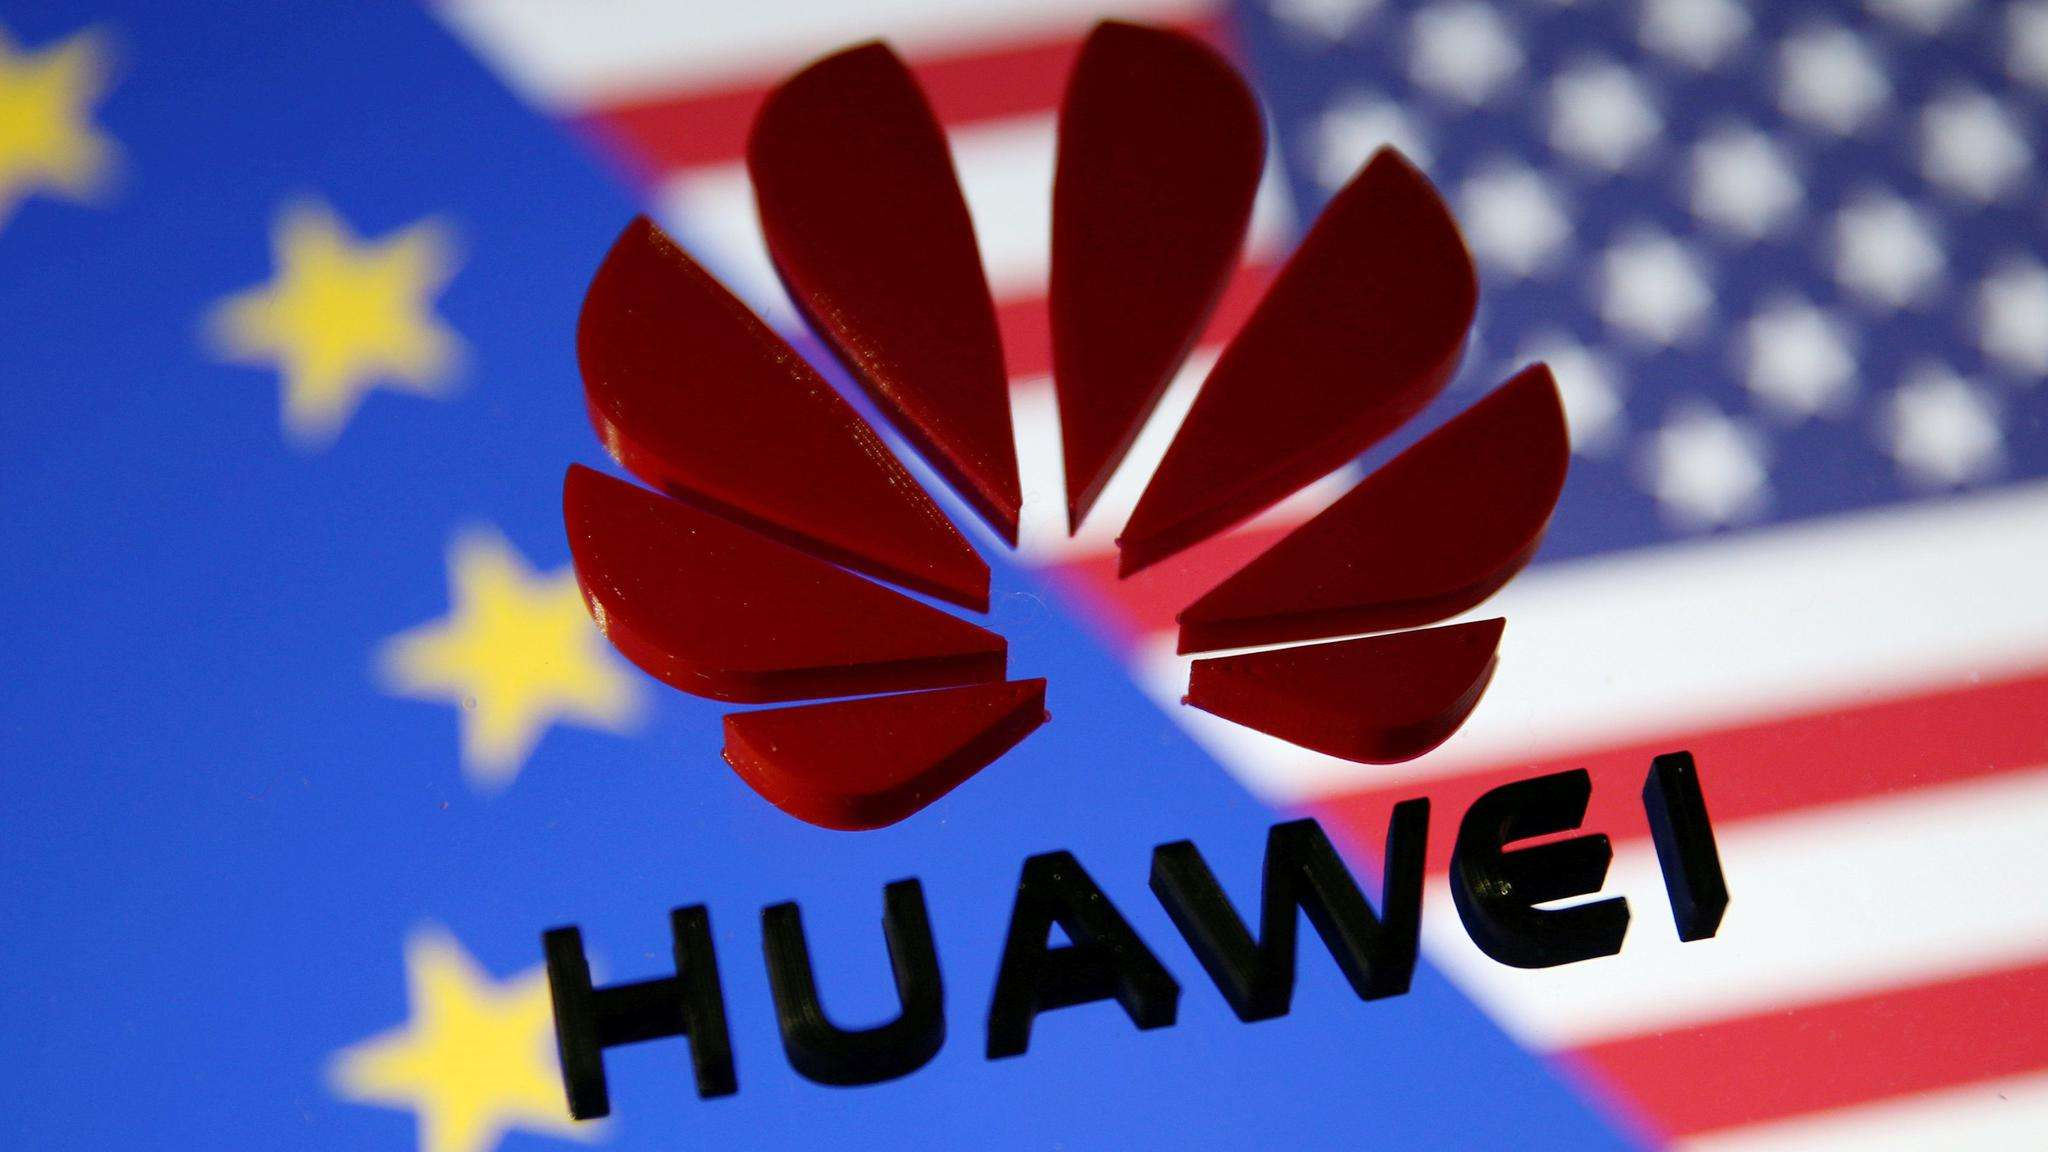 Huawei once again denies the problem of Hongmeng system as a gimmick, revealing that it plans to buy 100 million chips from Qualcomm.